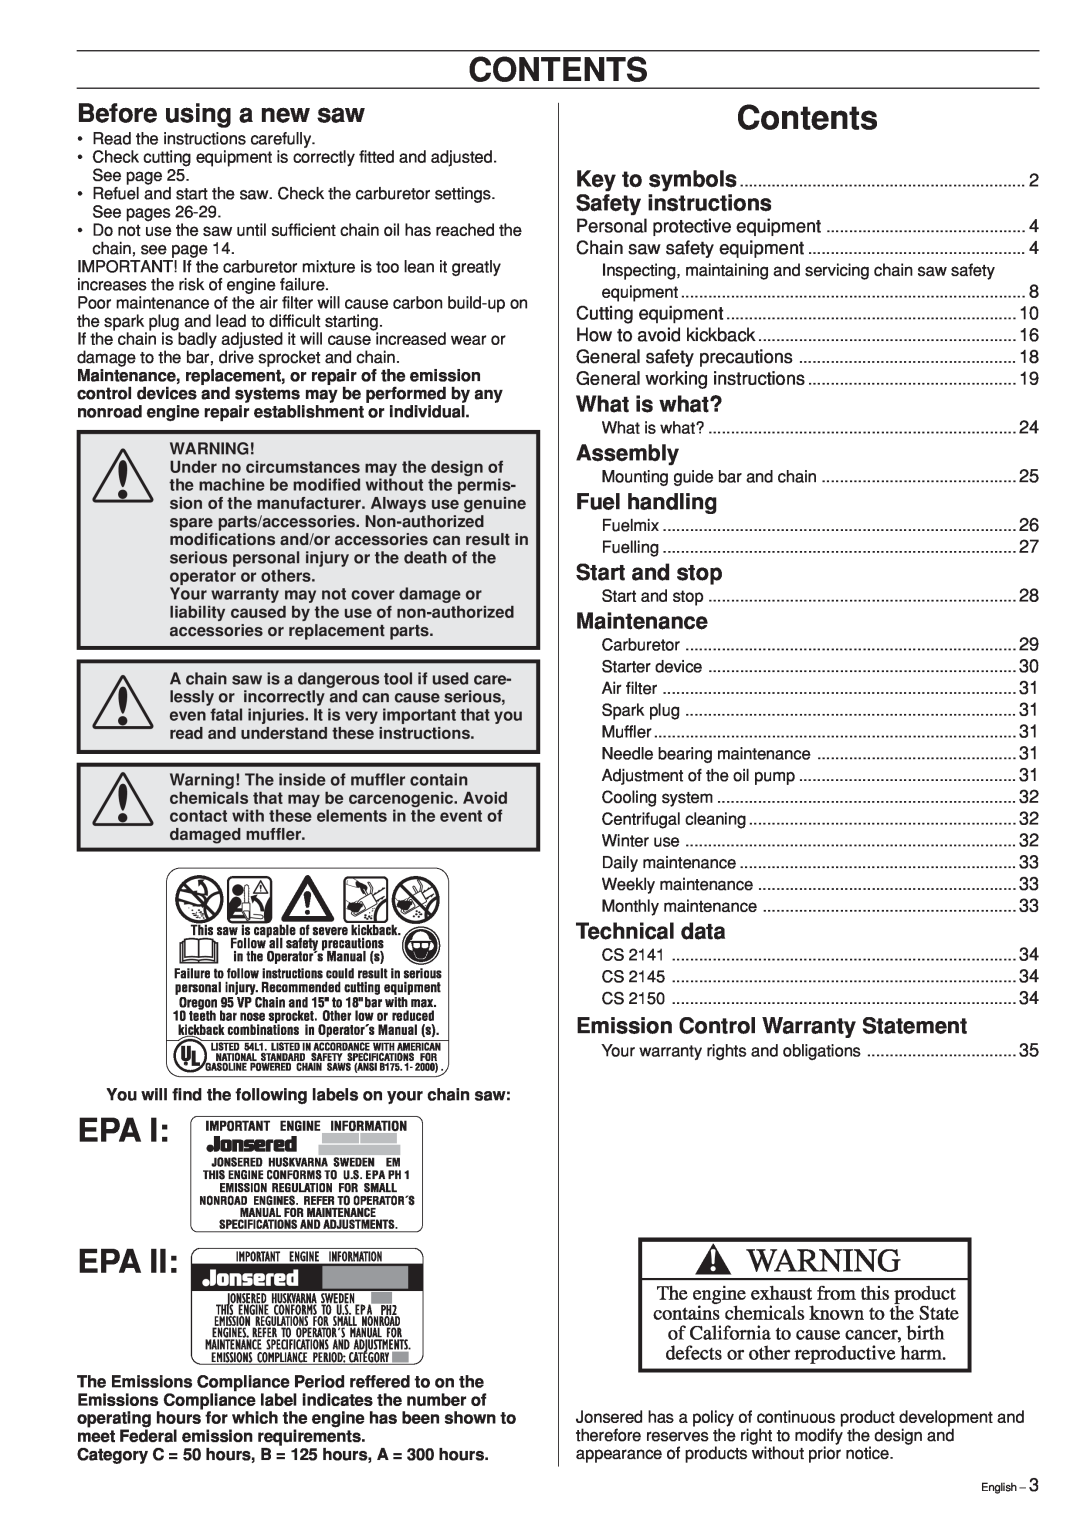 Jonsered CS 2141 Contents, Epa Epa, Before using a new saw, Safety instructions, What is what?, Assembly, Fuel handling 